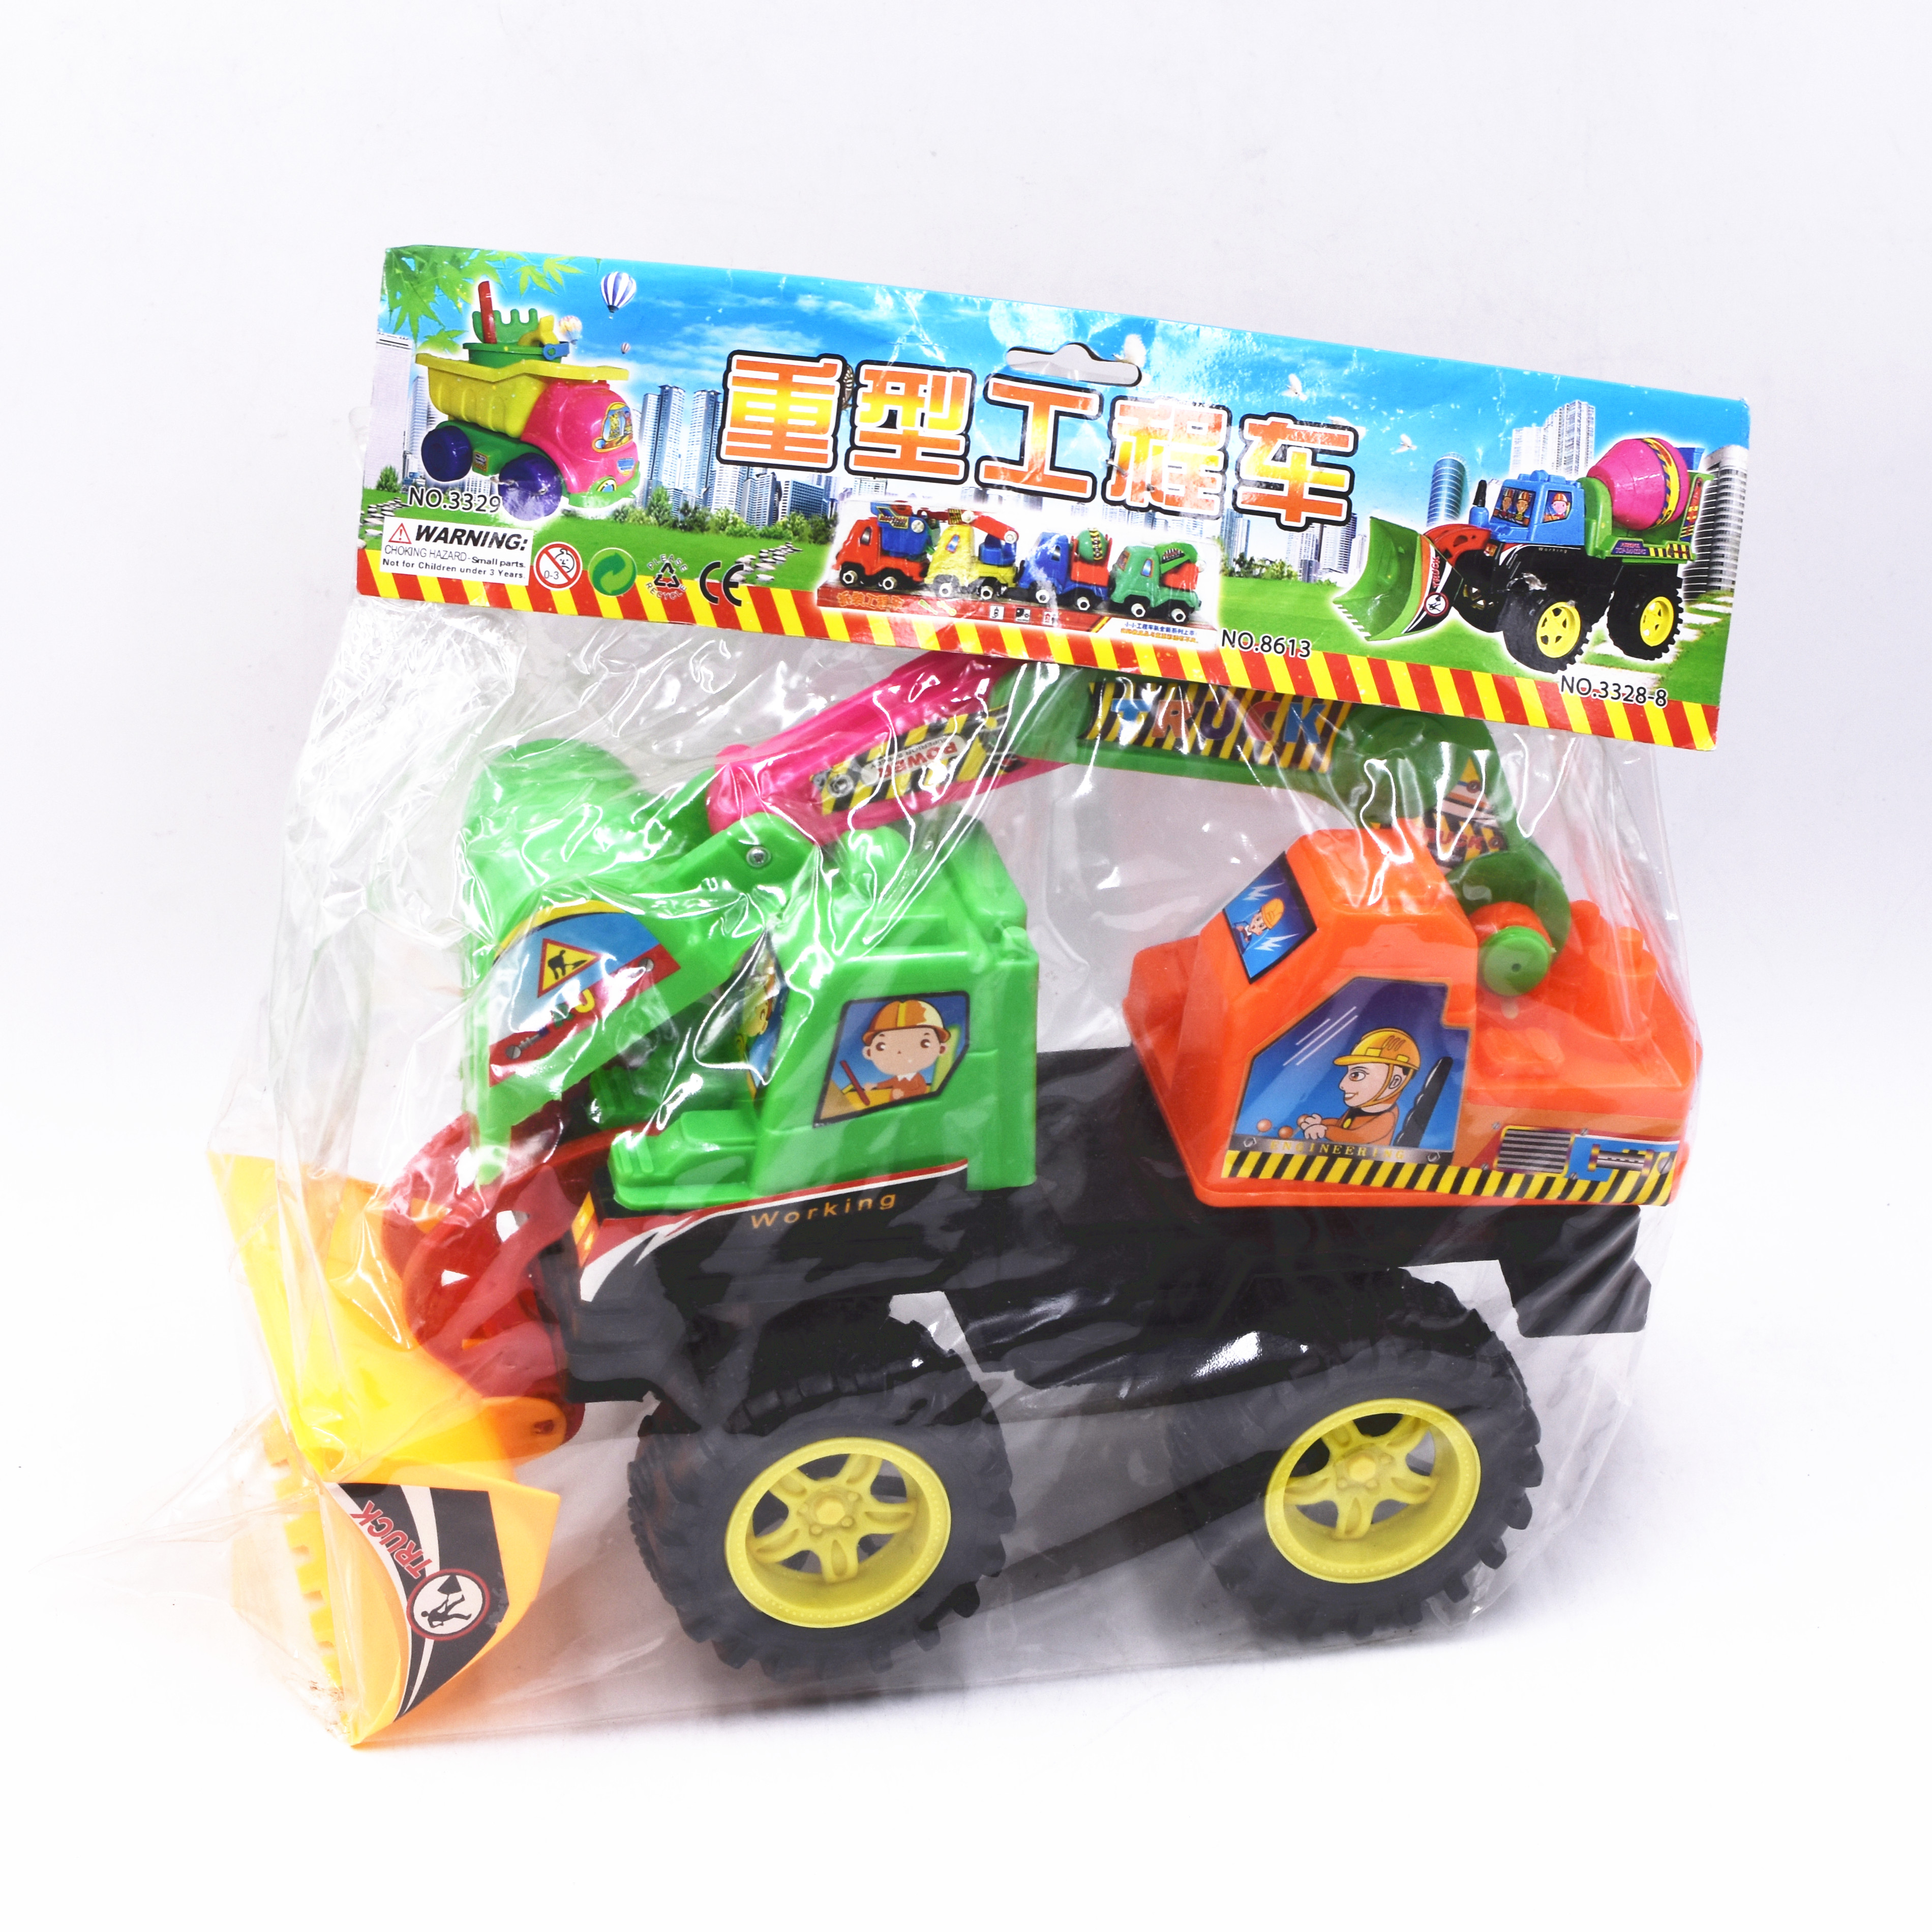 FREE WHEEL TRUCK TOY LY1793